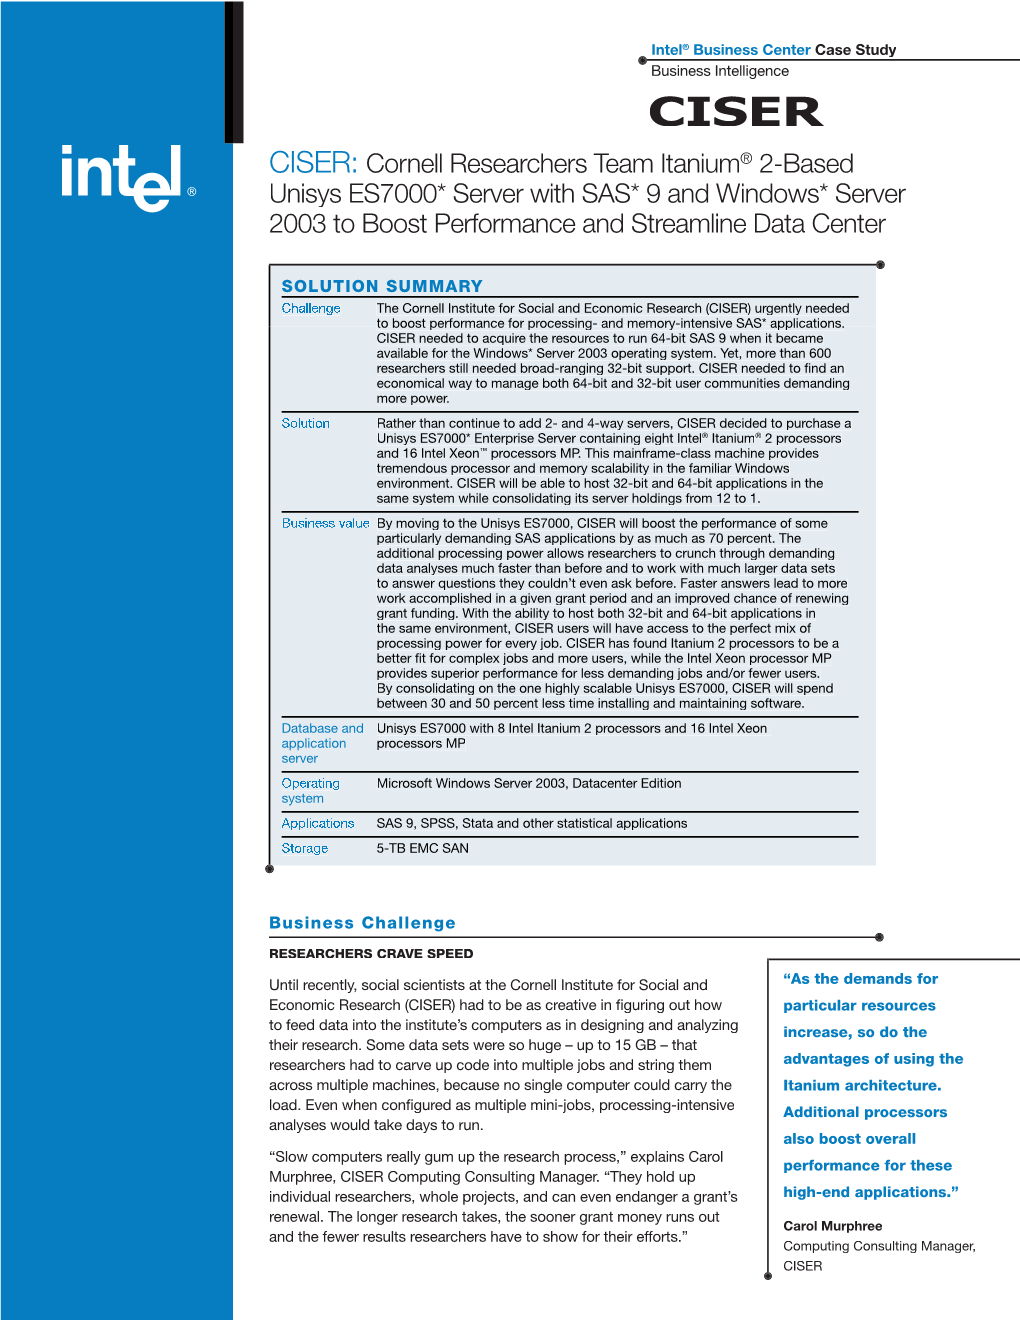 CISER: Cornell Researchers Team Itanium® 2-Based Unisys ES7000* Server with SAS* 9 and Windows* Server 2003 to Boost Performance and Streamline Data Center